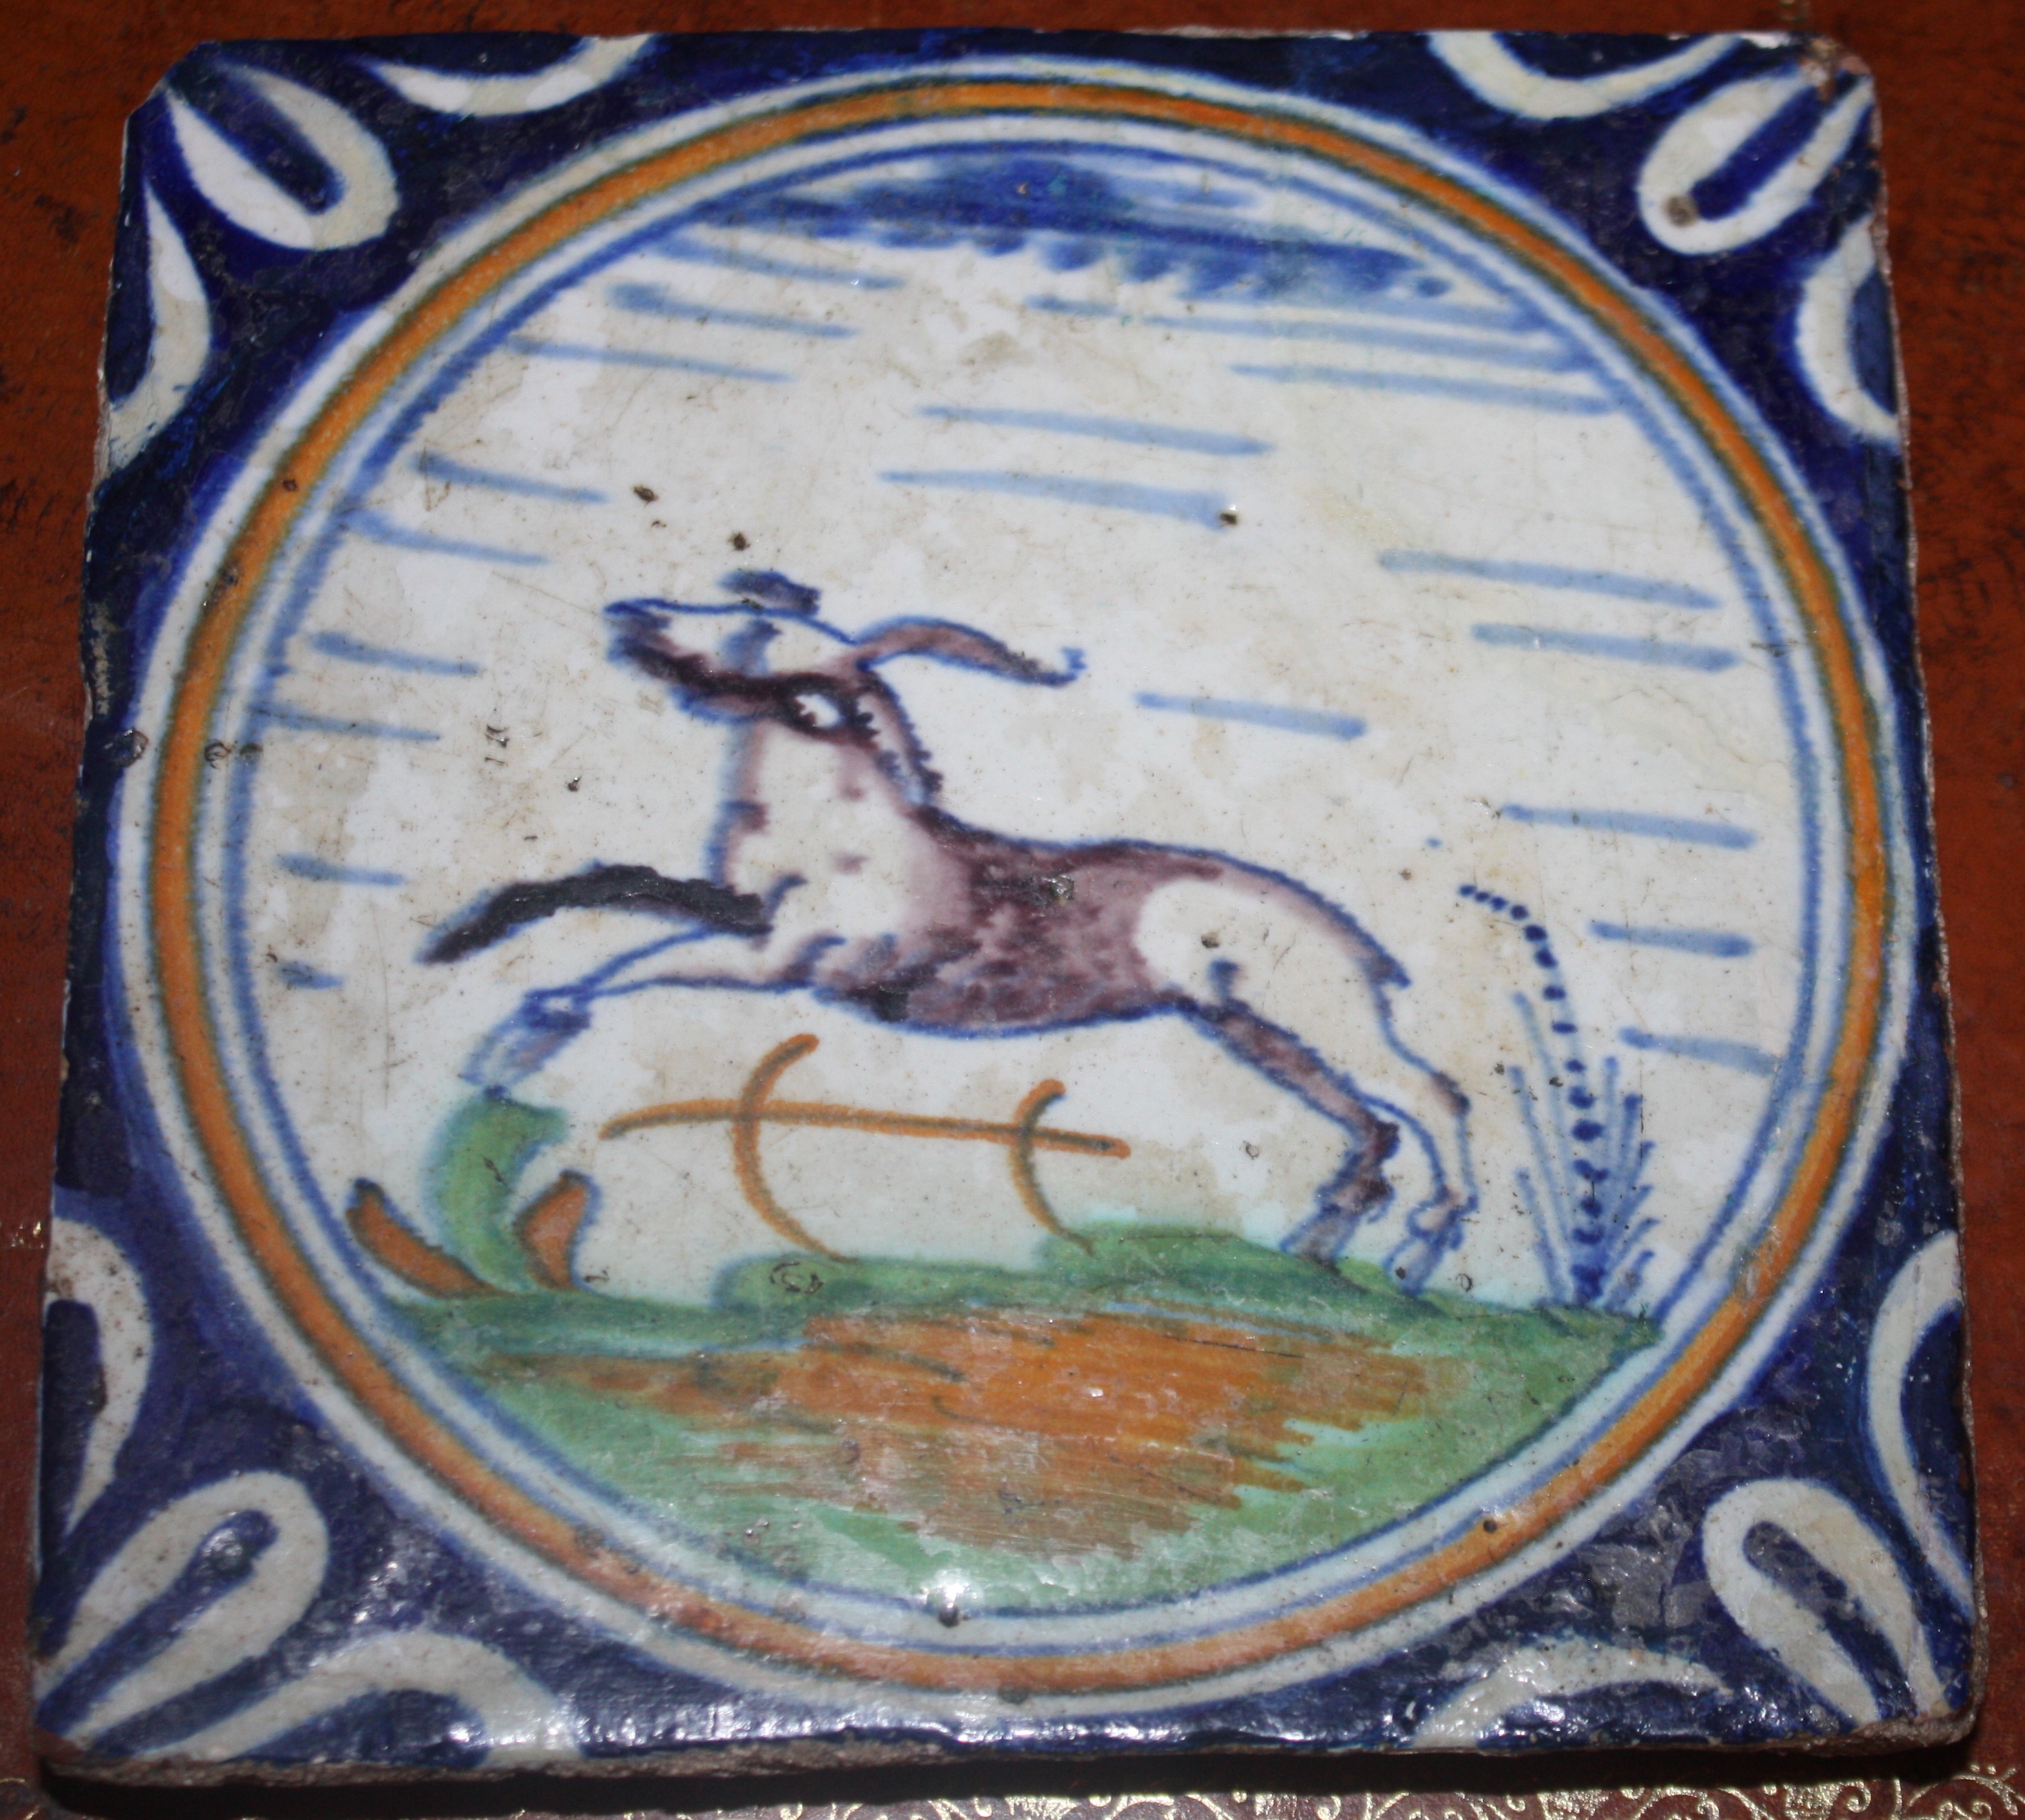 A 17th century Delft polychrome stoneware tile displaying a jumping roebuck